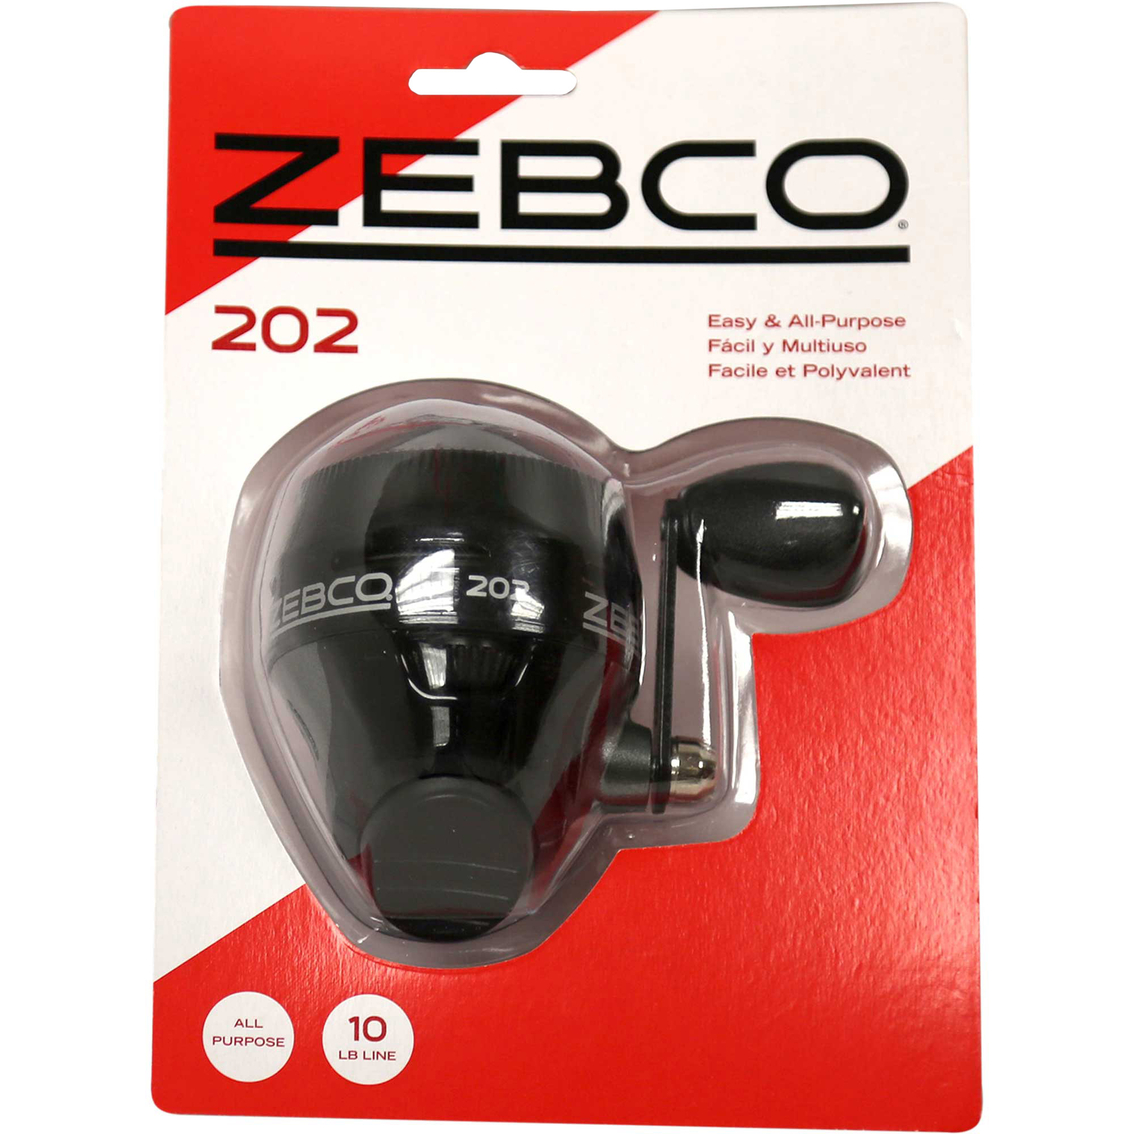 Zebco 202 Spin Cast Reel with 10 lb. Line - Image 5 of 5